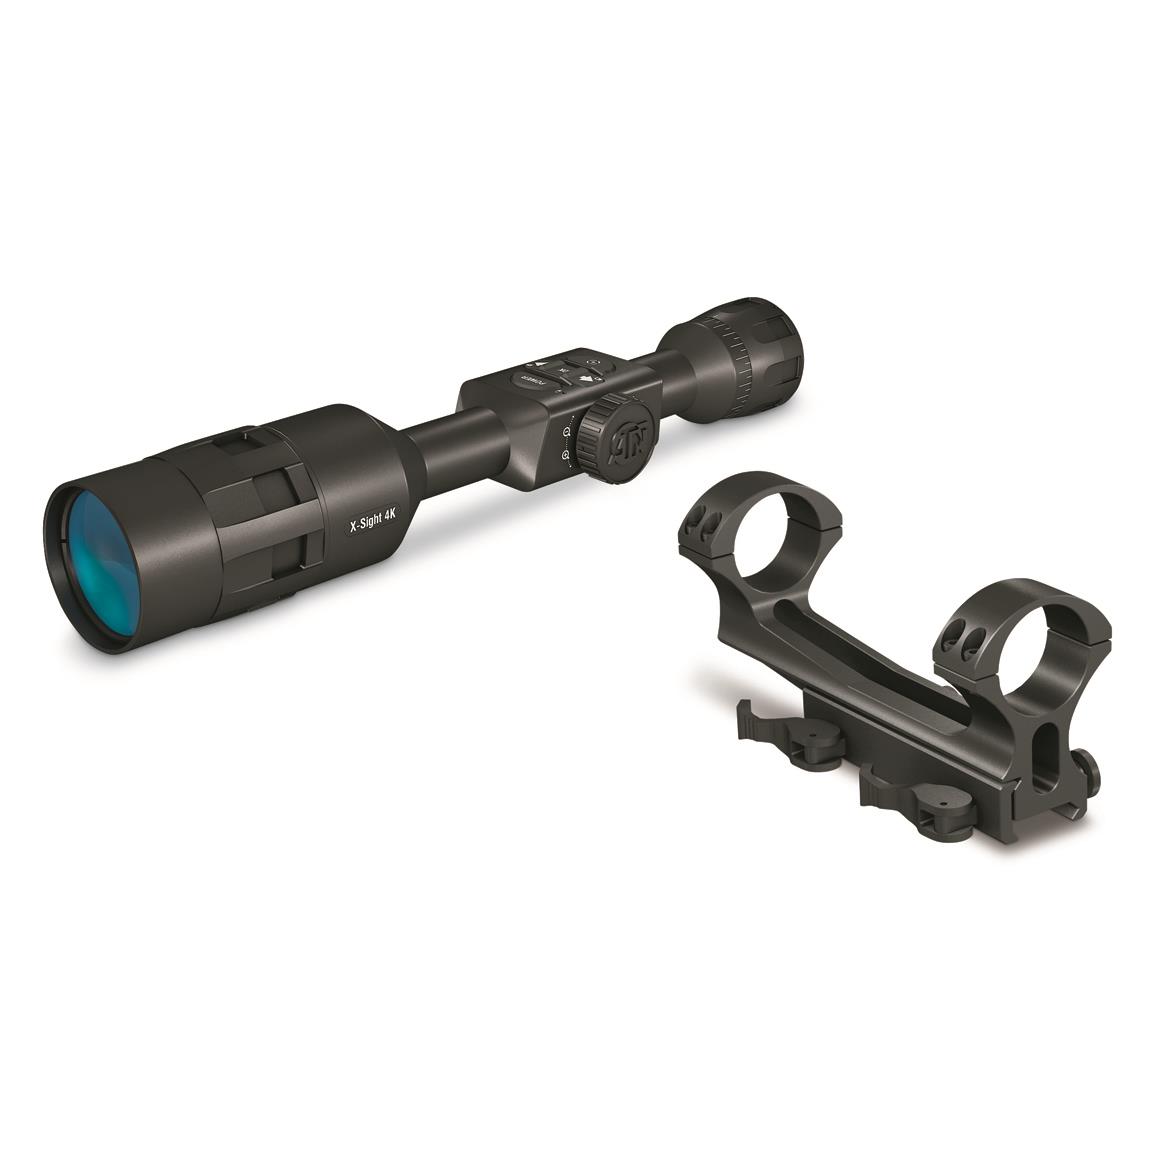 ATN X-Sight 4K Pro Series 5-20x Smart HD Day/Night Rifle Scope with Dual Ring Cantilever Mount